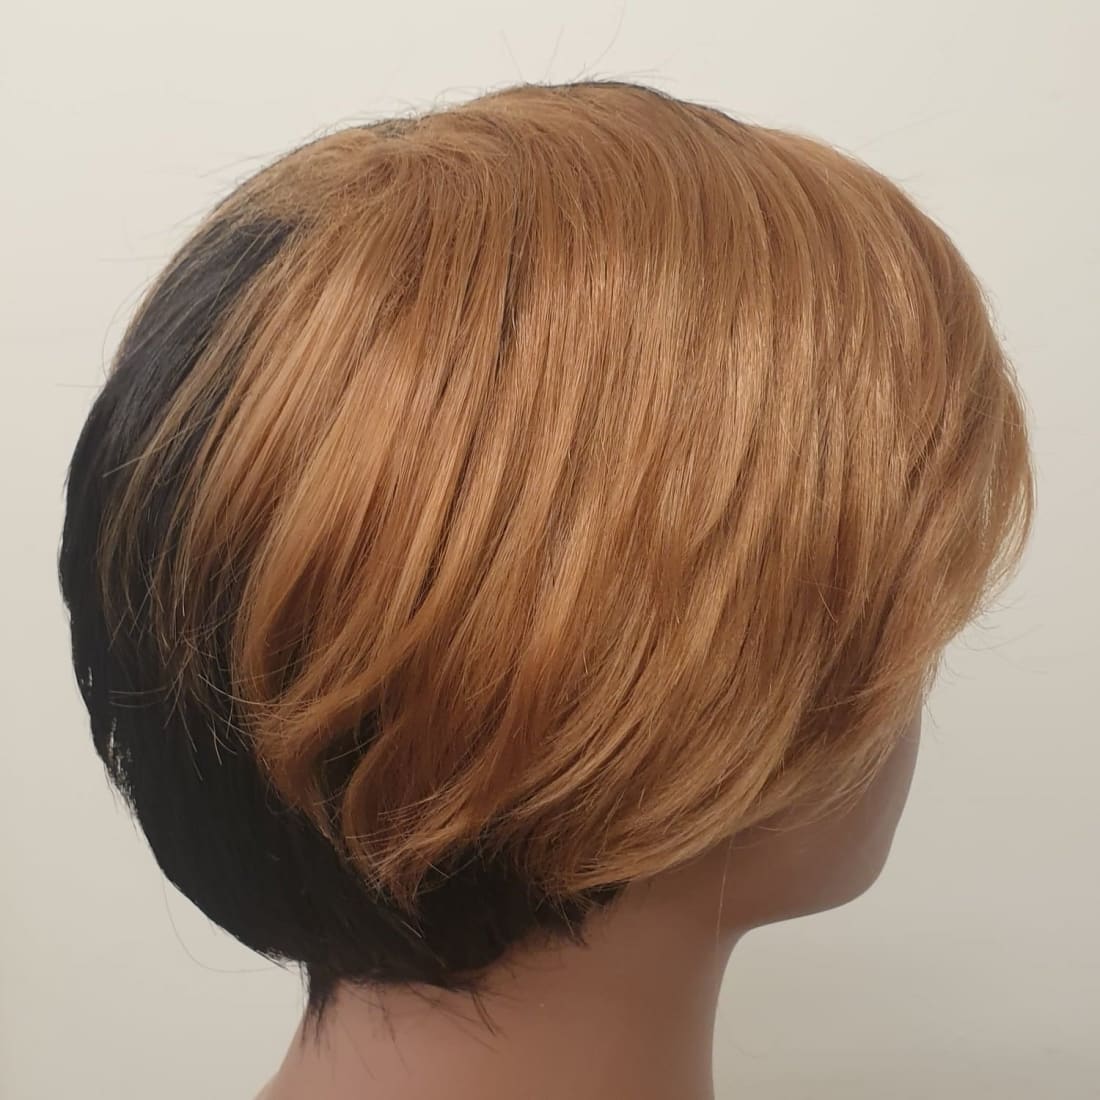 Pixie Cut Wig Short - Synthetic Hair -> Wig